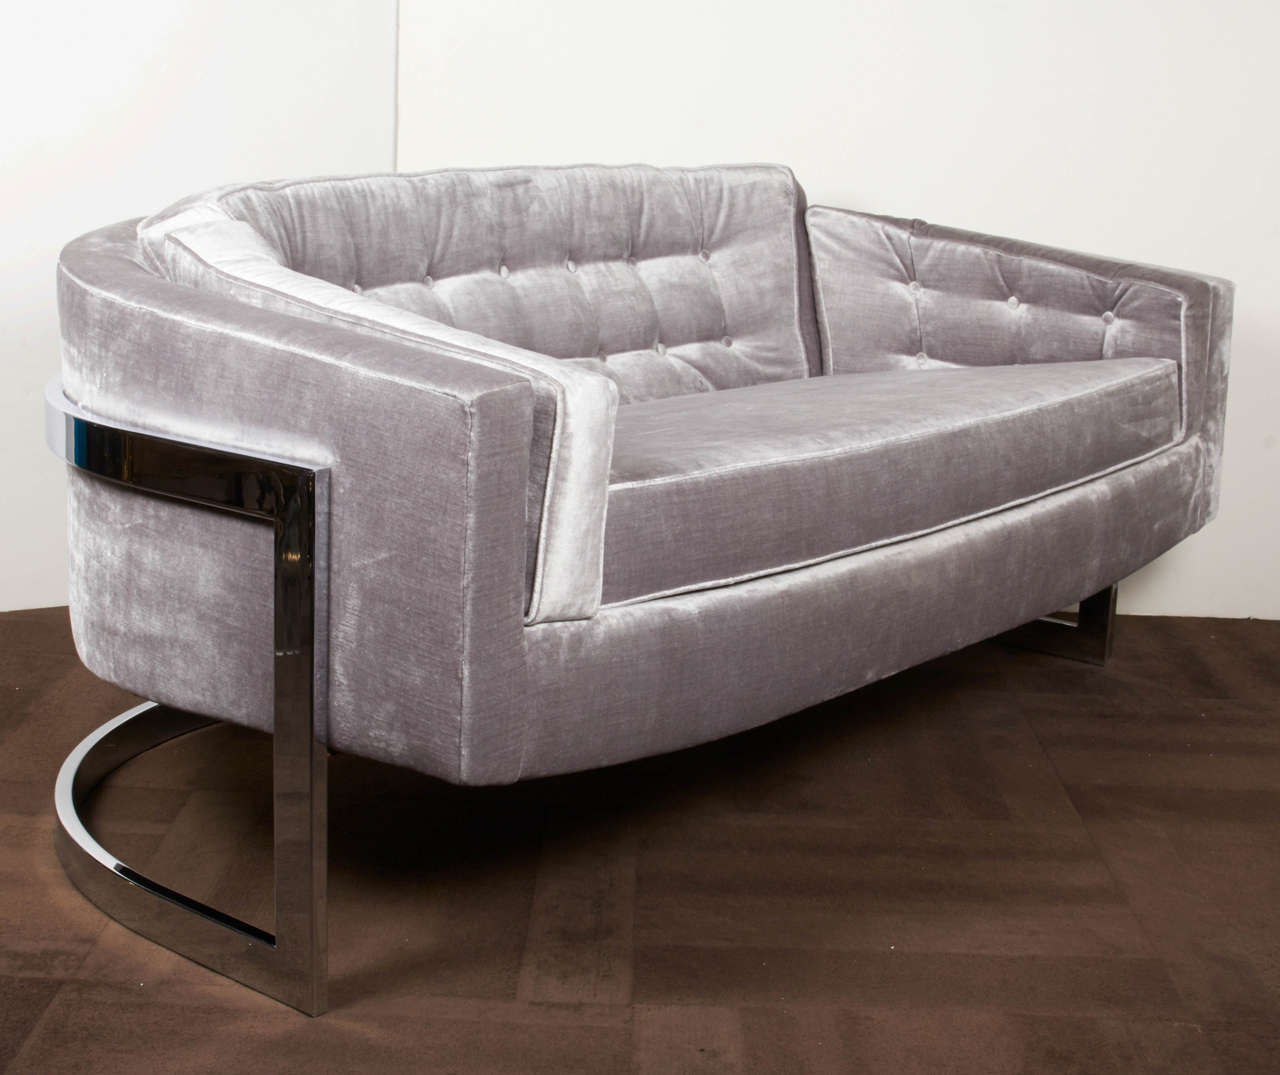 Luxurious sofa/loveseat with a streamline cantilevered frame in polished chrome. Ultra chic design with barrel form exemplifying the best of American Mid-Century design. Newly reupholstered in a lavish grey metallic velvet with tailored biscuit